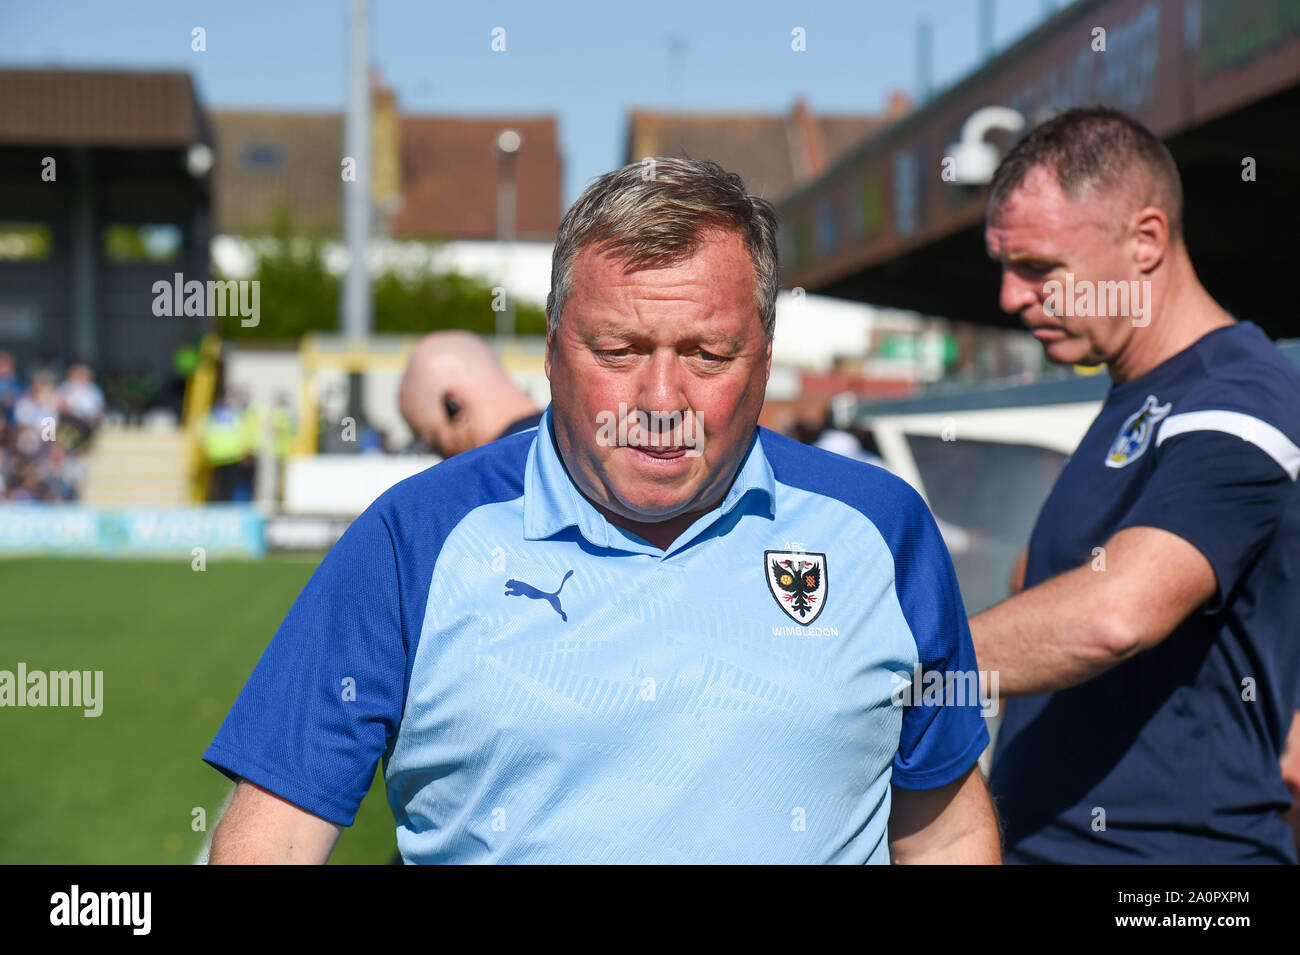 London UK 21 September 2019 - AFC Wimbledon manager Wally Downes with Bristol Rovers manager Graham Coughlan behind during the Sky Bet League One football match between AFC Wimbledon and Bristol Rovers at the Cherry Red Records Stadium - Editorial use only. No merchandising. For Football images FA and Premier League restrictions apply inc. no internet/mobile usage without FAPL license - for details contact Football Dataco . Credit : Simon Dack TPI / Alamy Live News Stock Photo